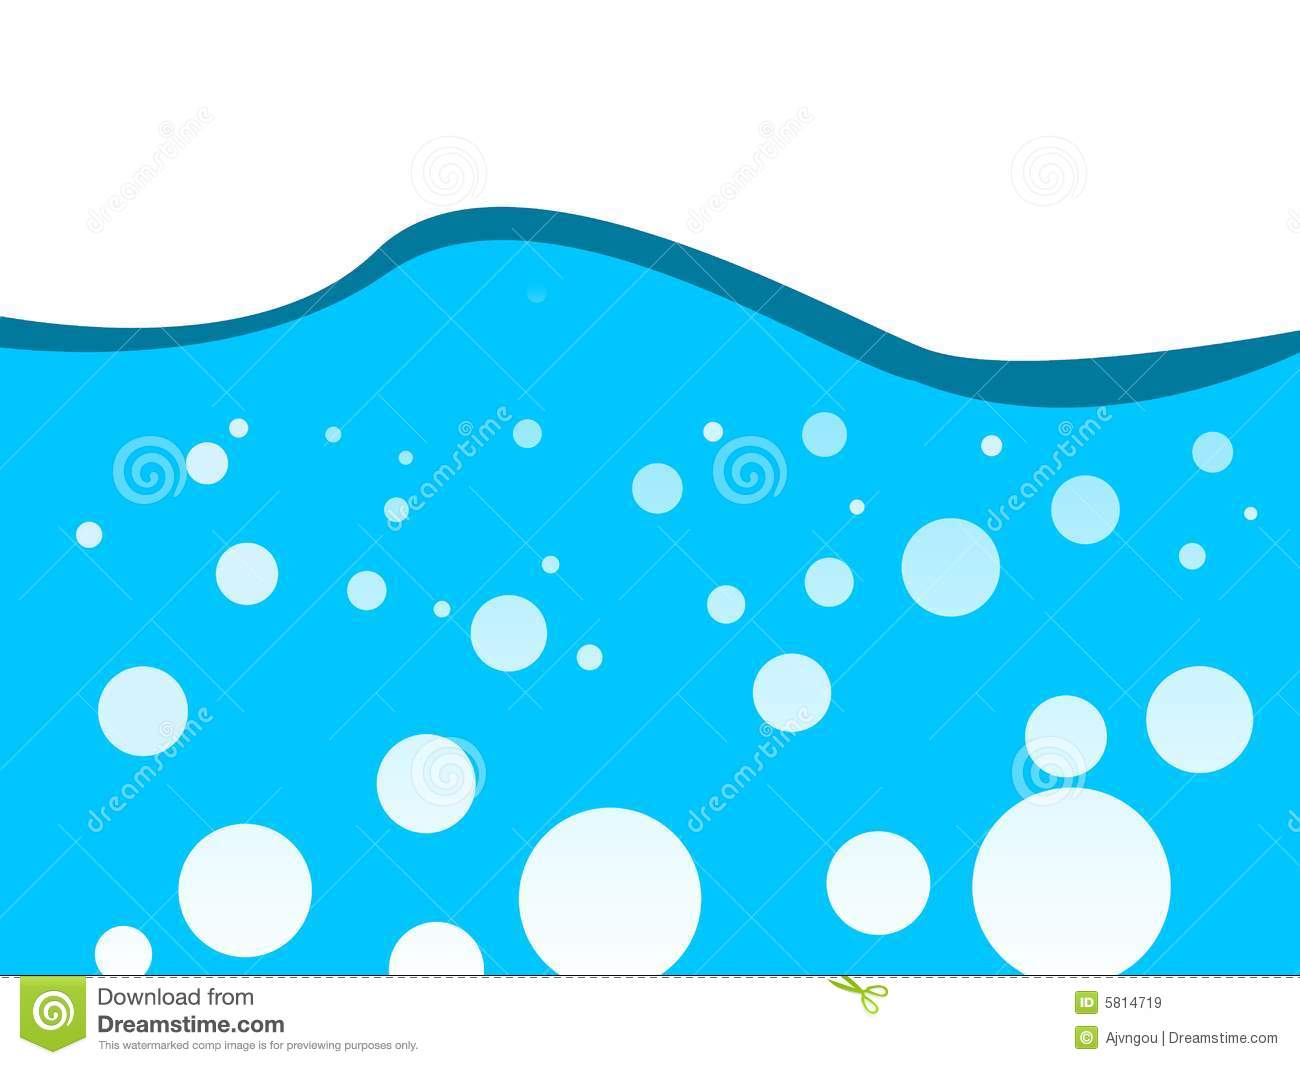 Displaying 20  Images For   Ocean Bubble Clipart